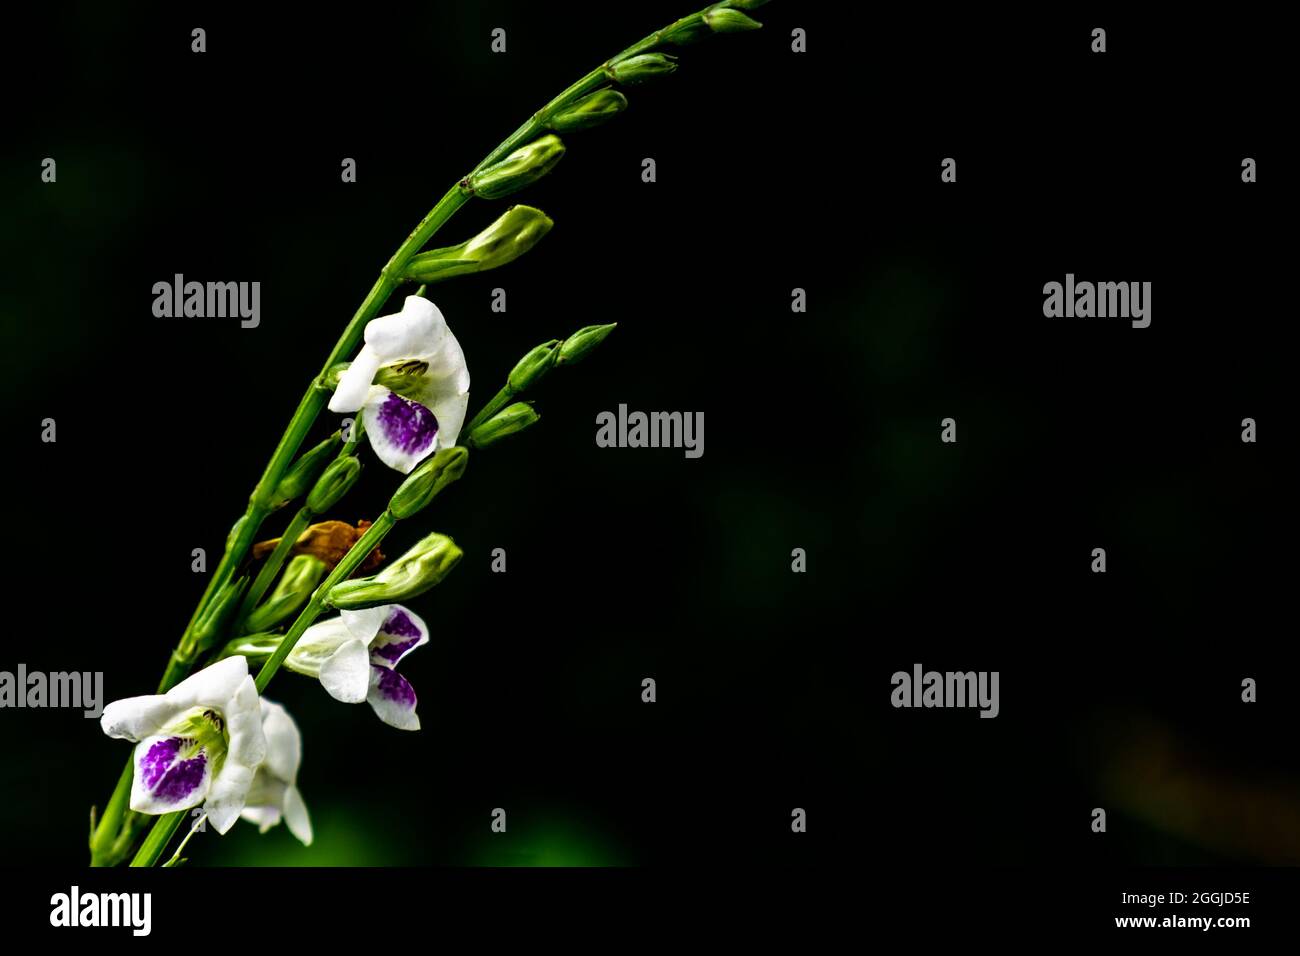 a blade of grass with white and purple flowers shaped like a bell, isolated on a black background, can be used for illustration and background Stock Photo